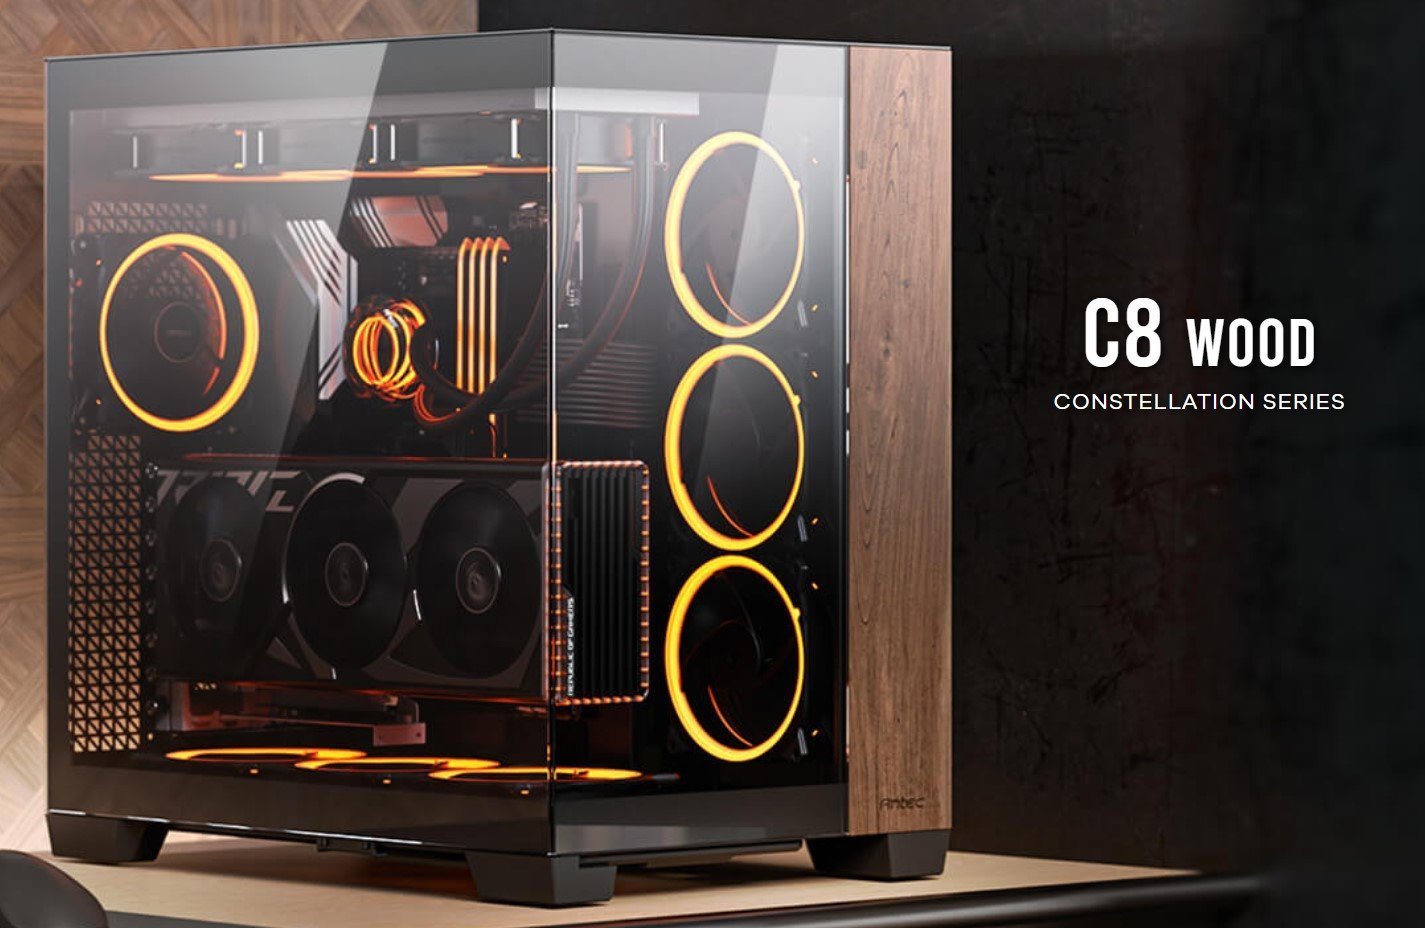 Antec C8 Wood E-Atx, Atx, Seamless Edge View Front And Side, Usb-C, 4MM Tempered Glass, 360MM Liquid Cooler Top, Bottom, Side. 2X Usb 3.0 Black Case.